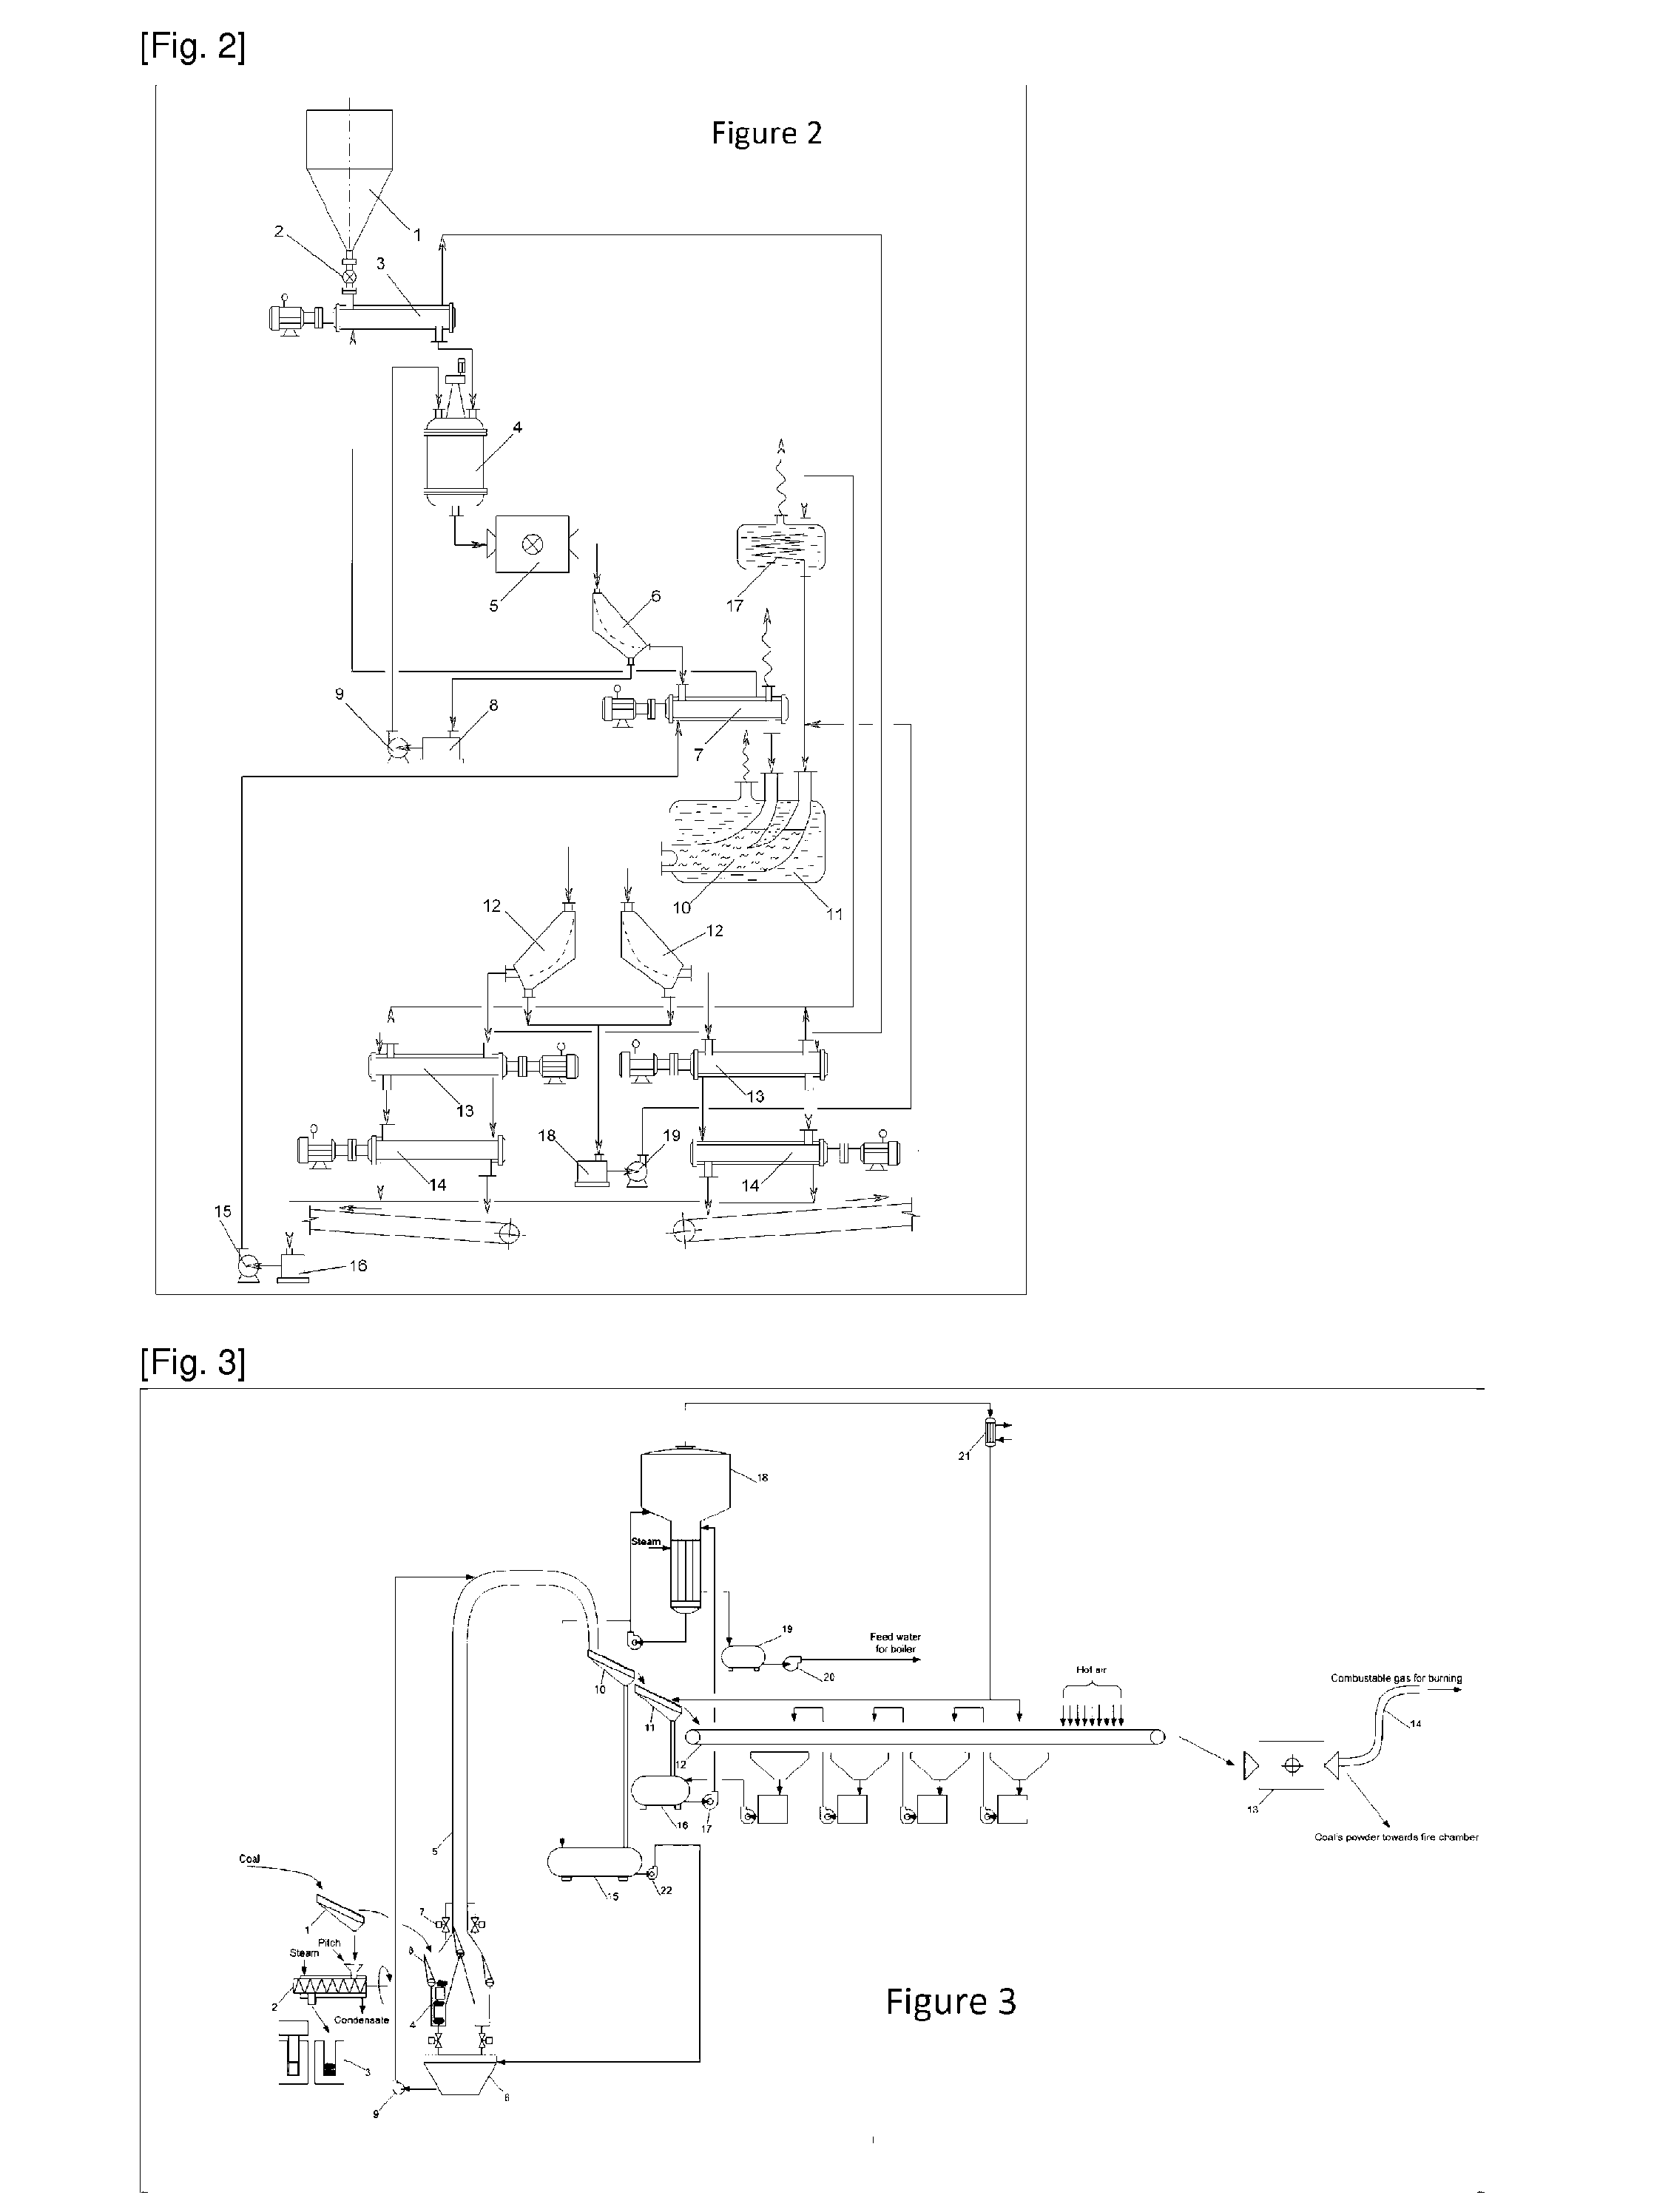 Method of mineral fuel beneficiation with subsequent delivery to the consumer by pipeline transportation